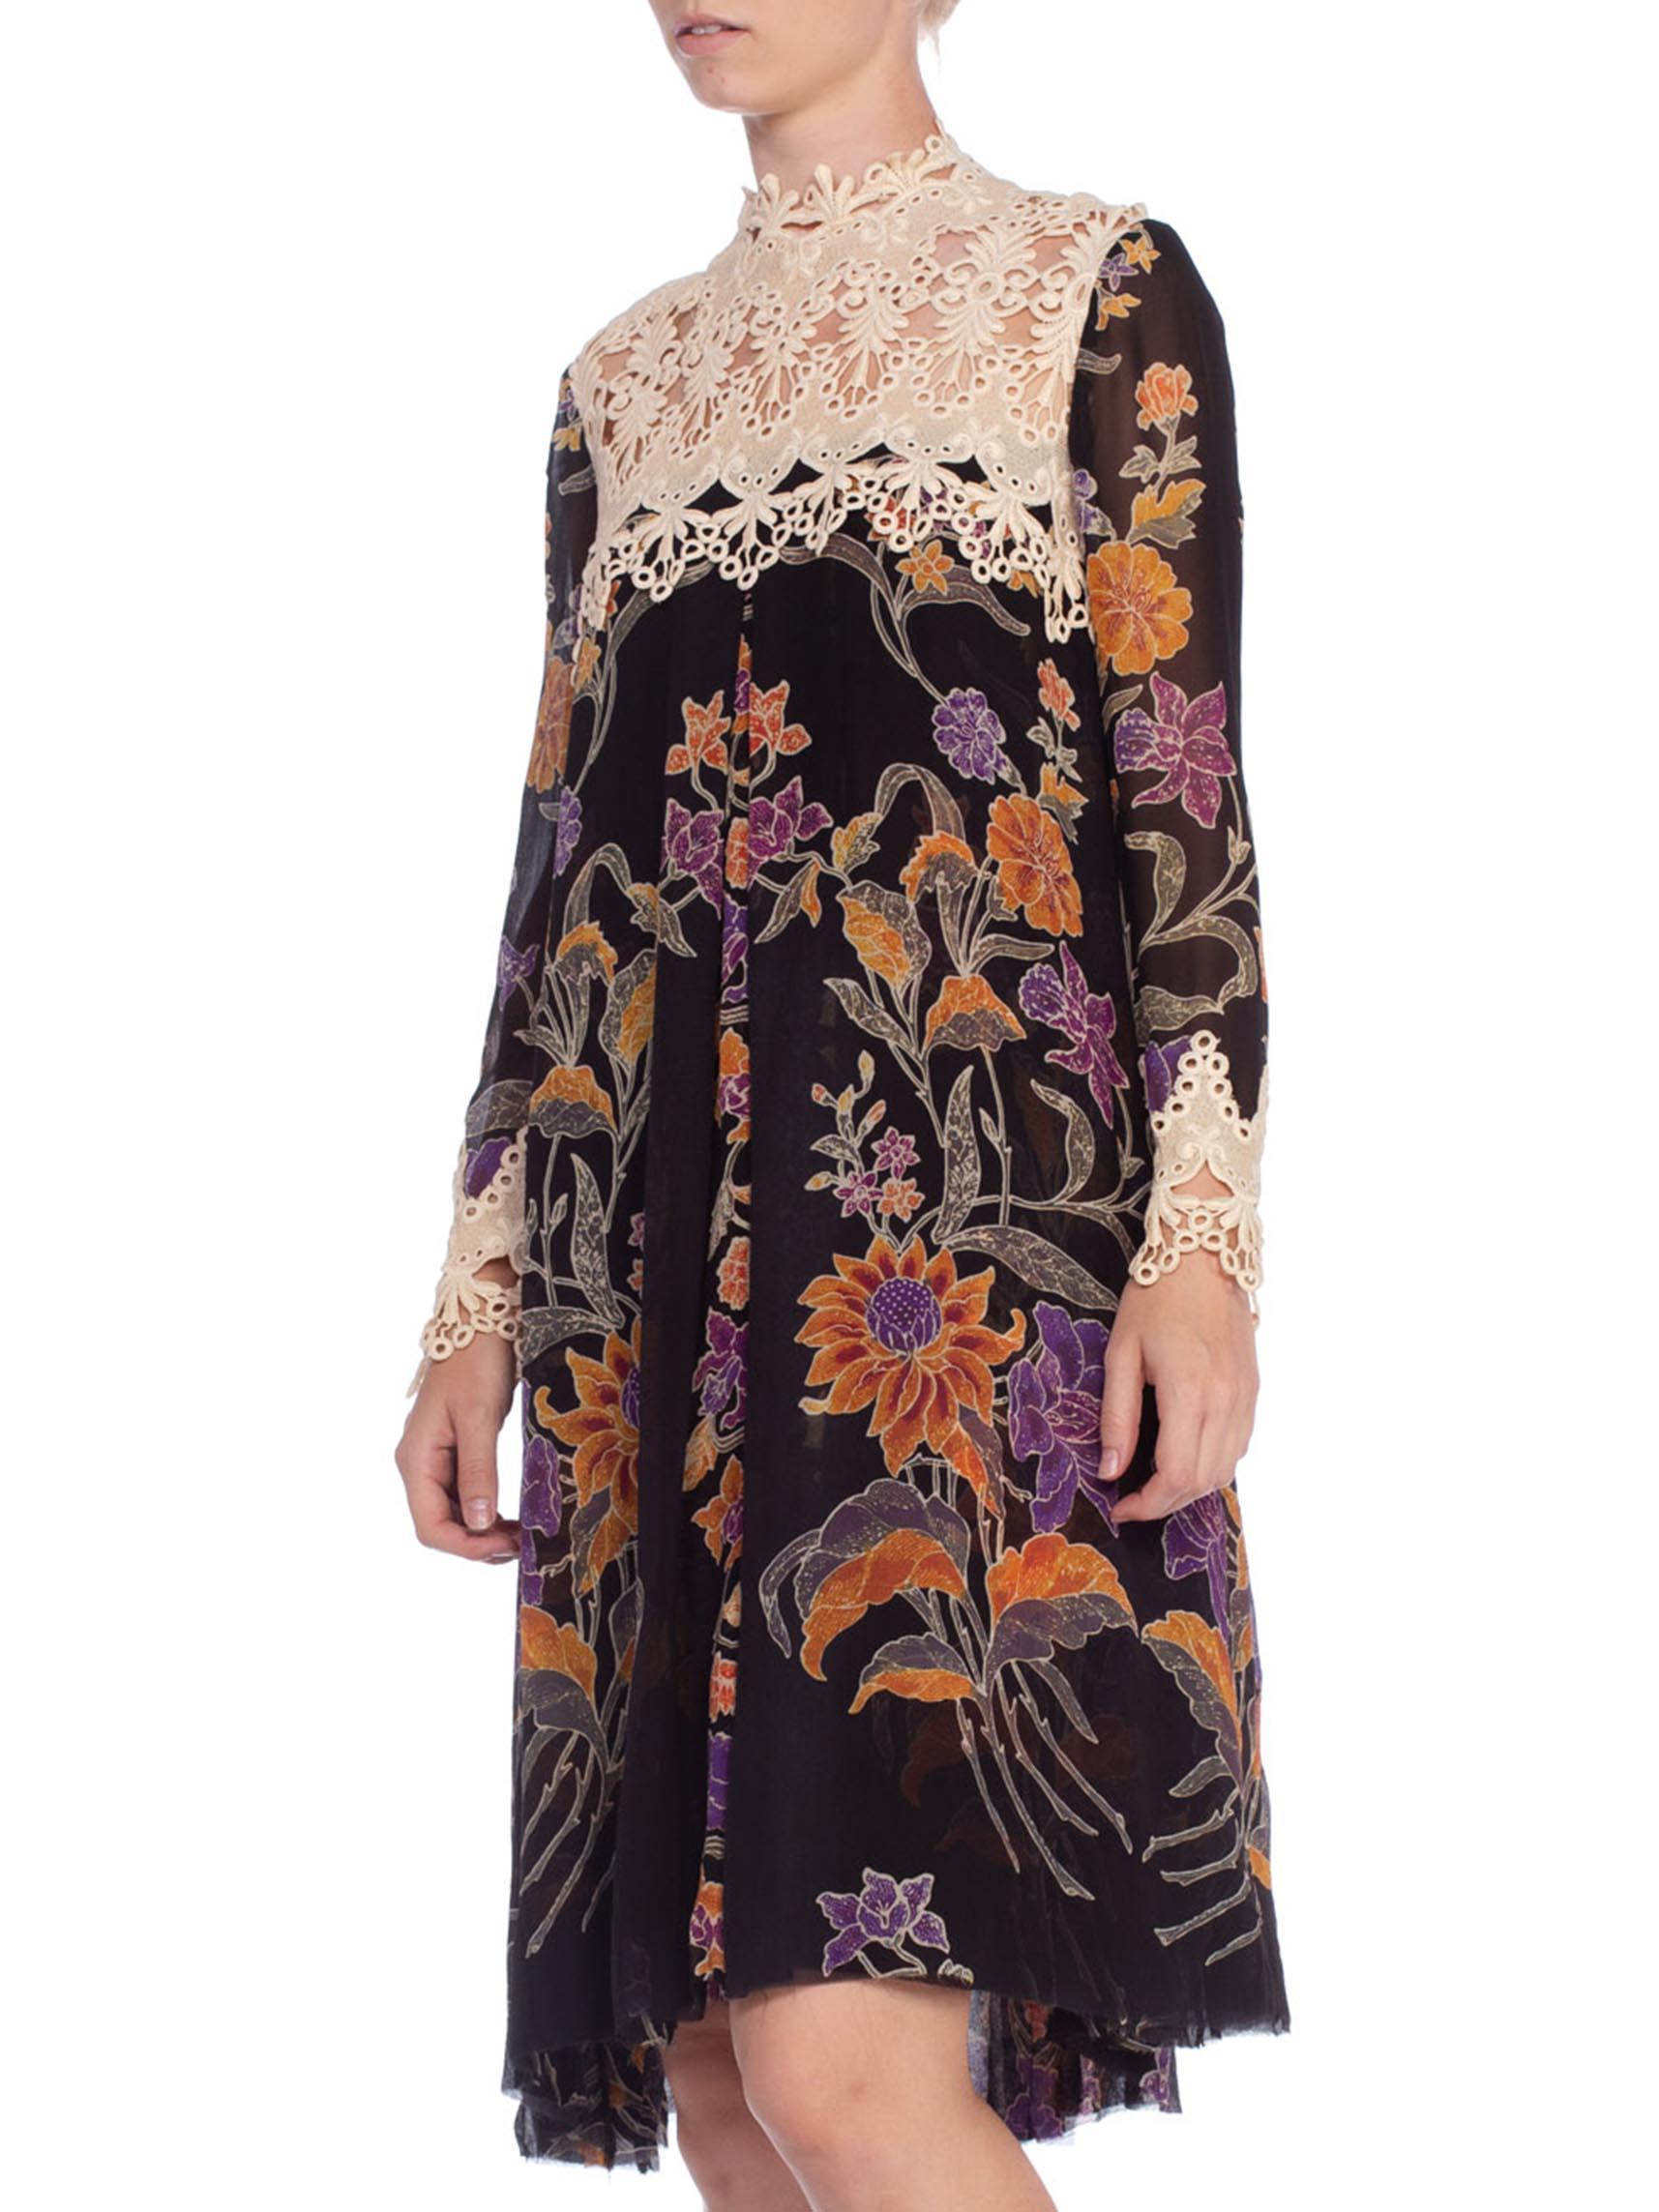 1960's Floral Sheer Chiffon Boho Dress With Lace 1